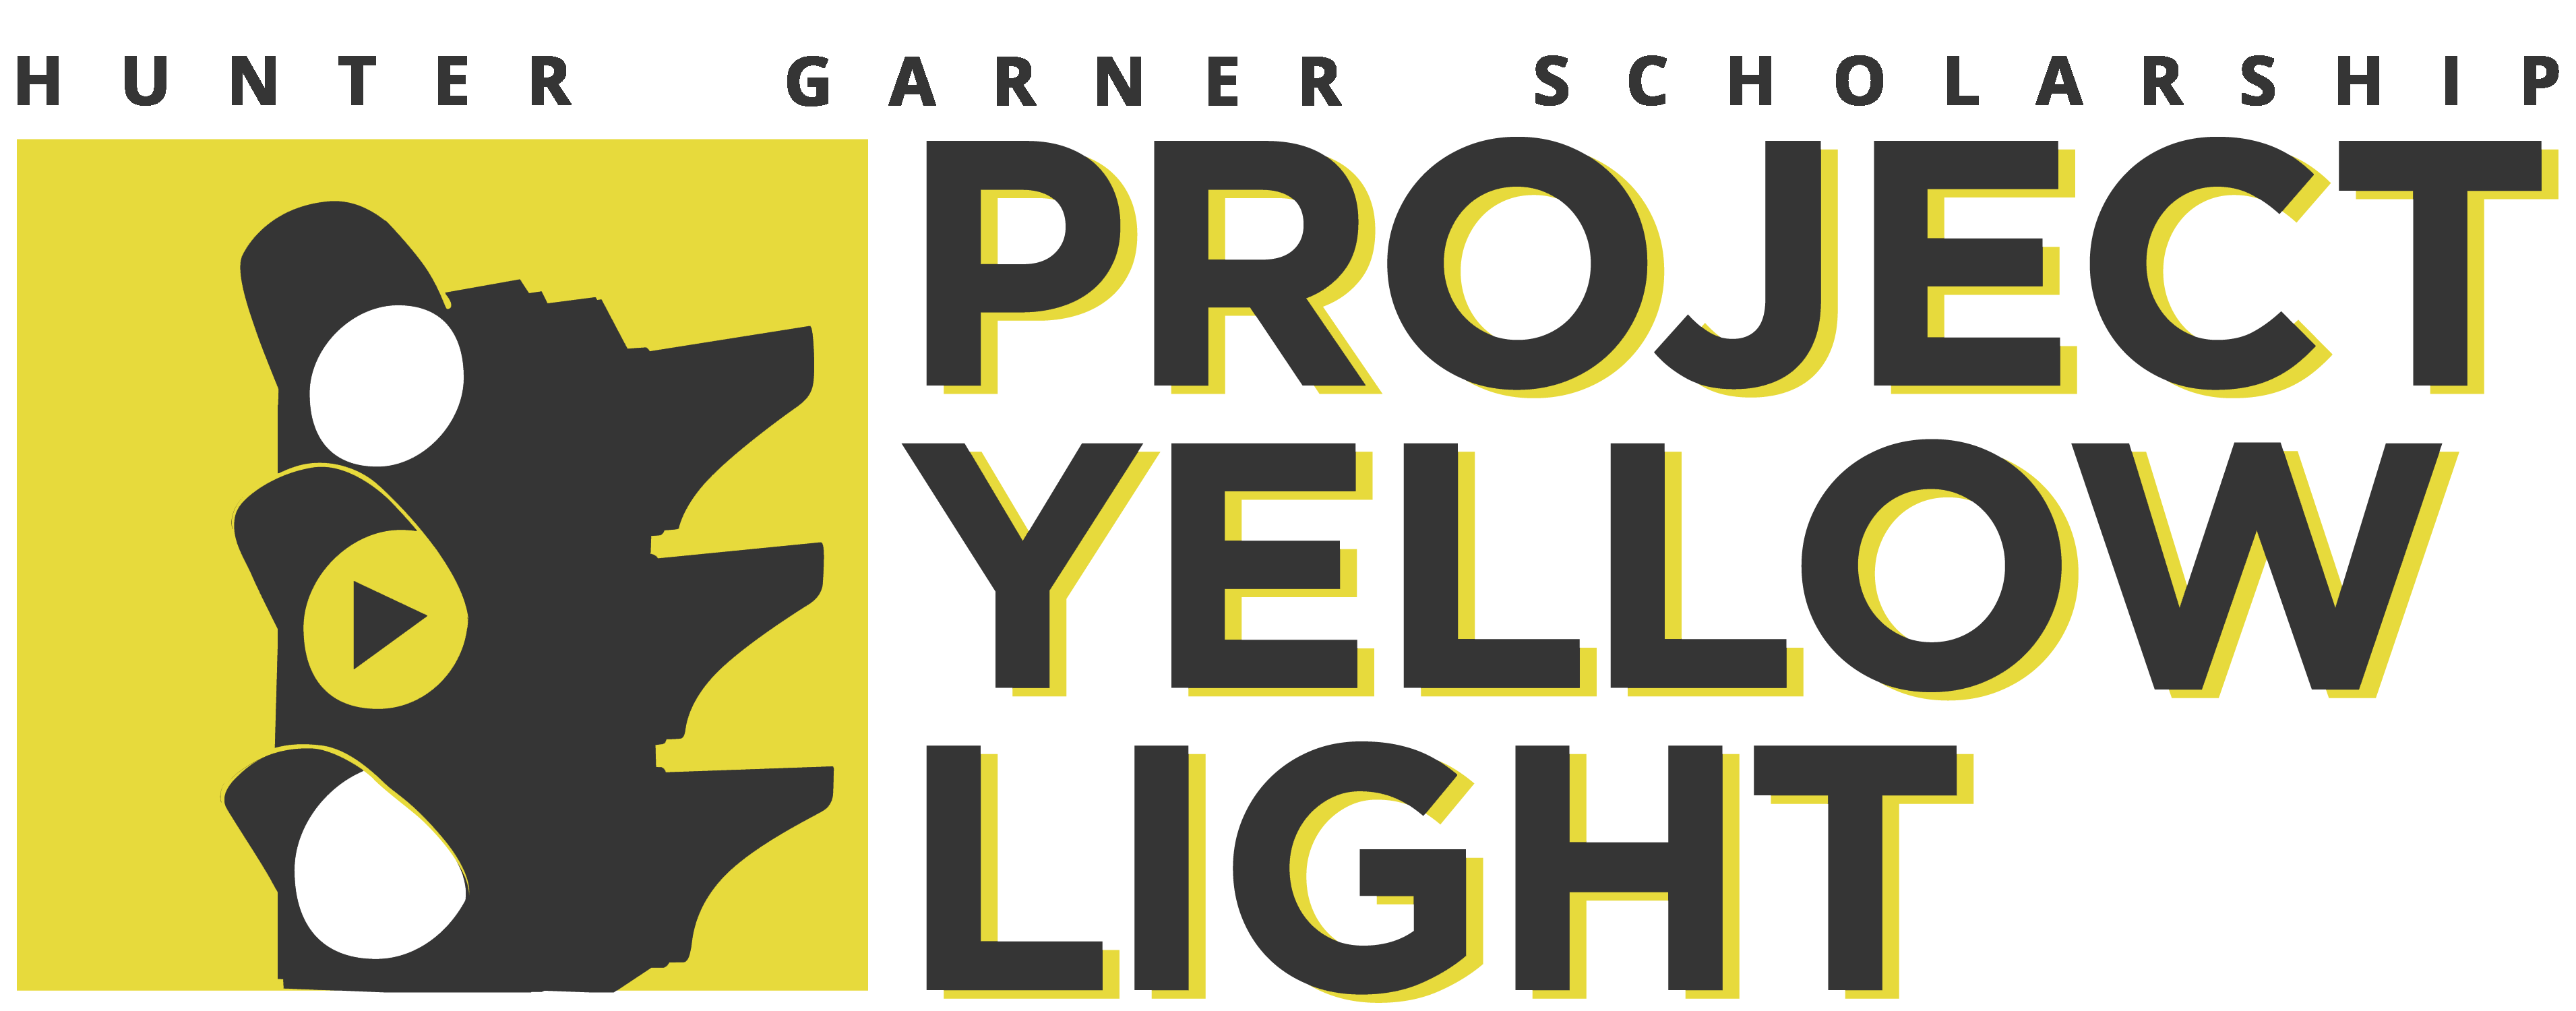 If you’re interested in applying for the scholarship, you can access the entry form and submit your creative work on the Apply page at http://www.projectyellowlight.com/apply. 